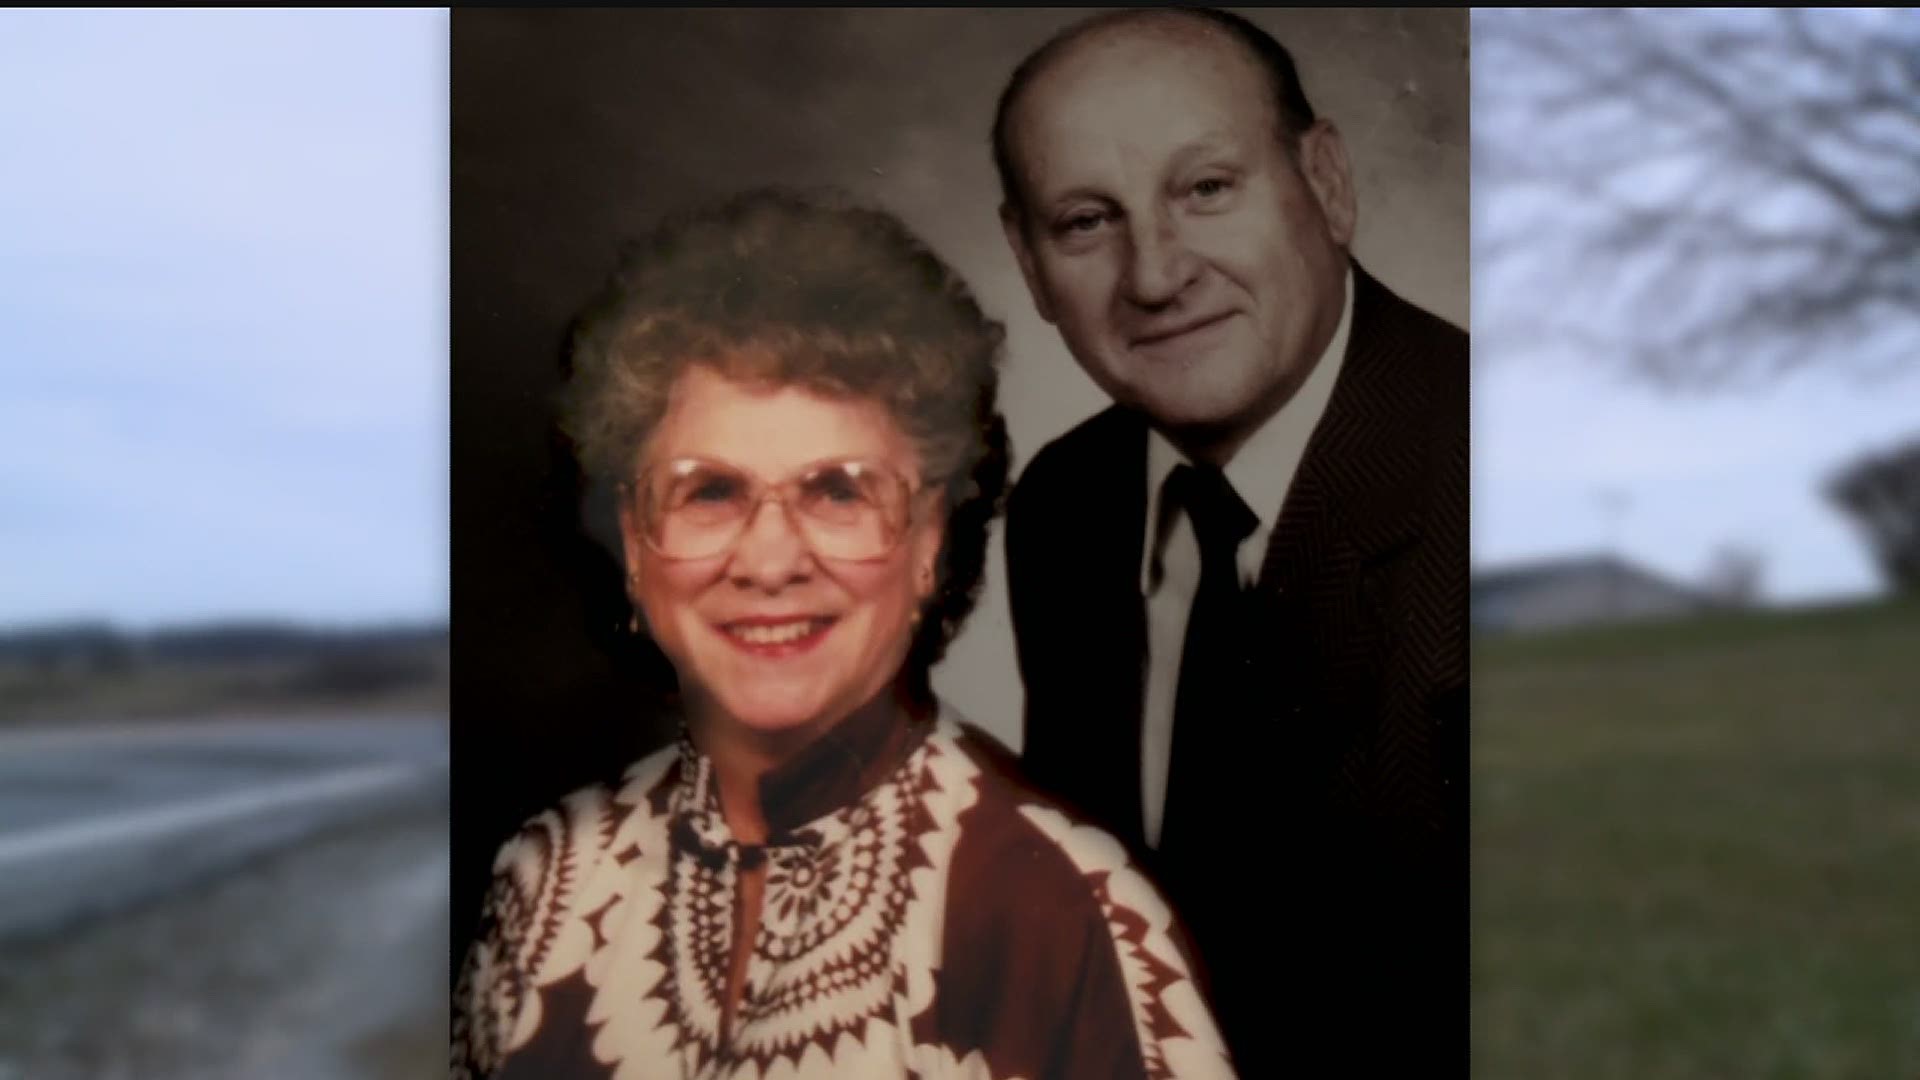 Police investigate Gladys Wheat hit-and-run cold case